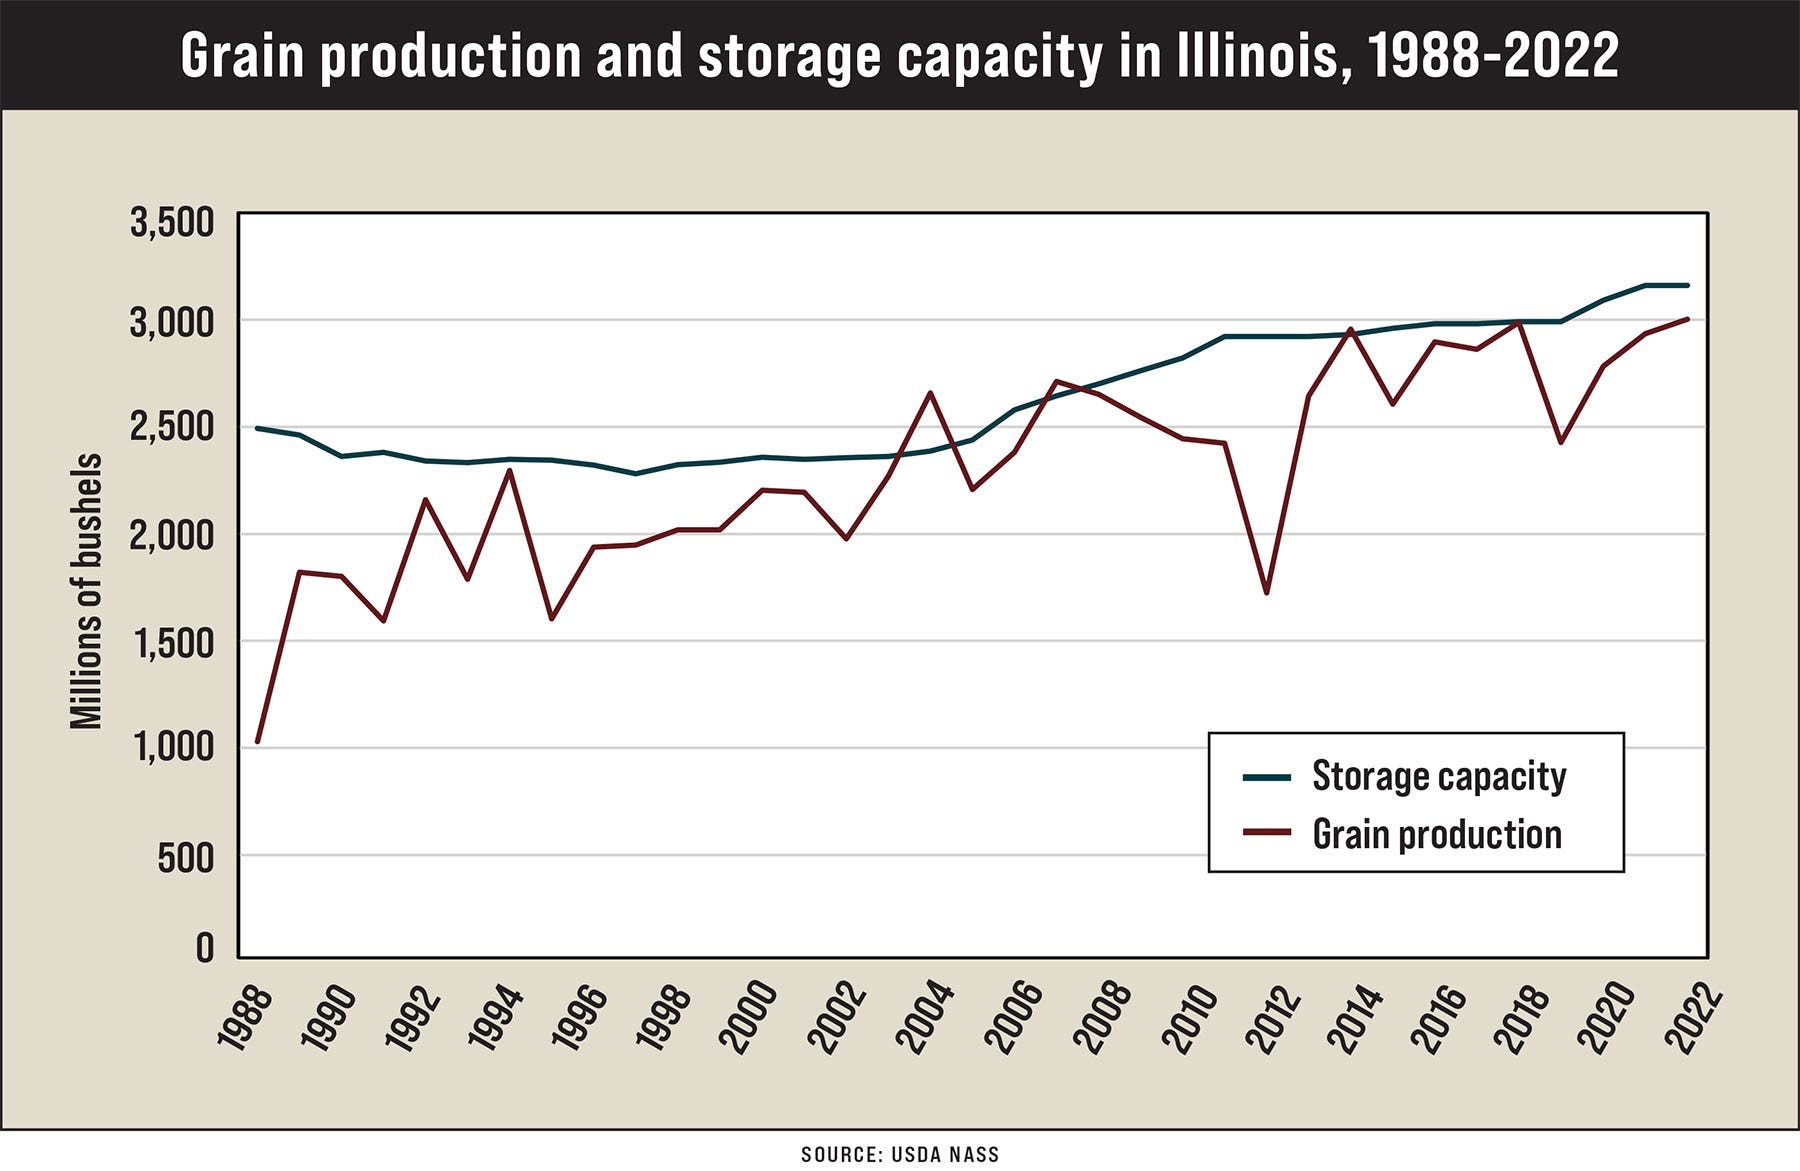 graph showing grain production and storage capacity in Illinois